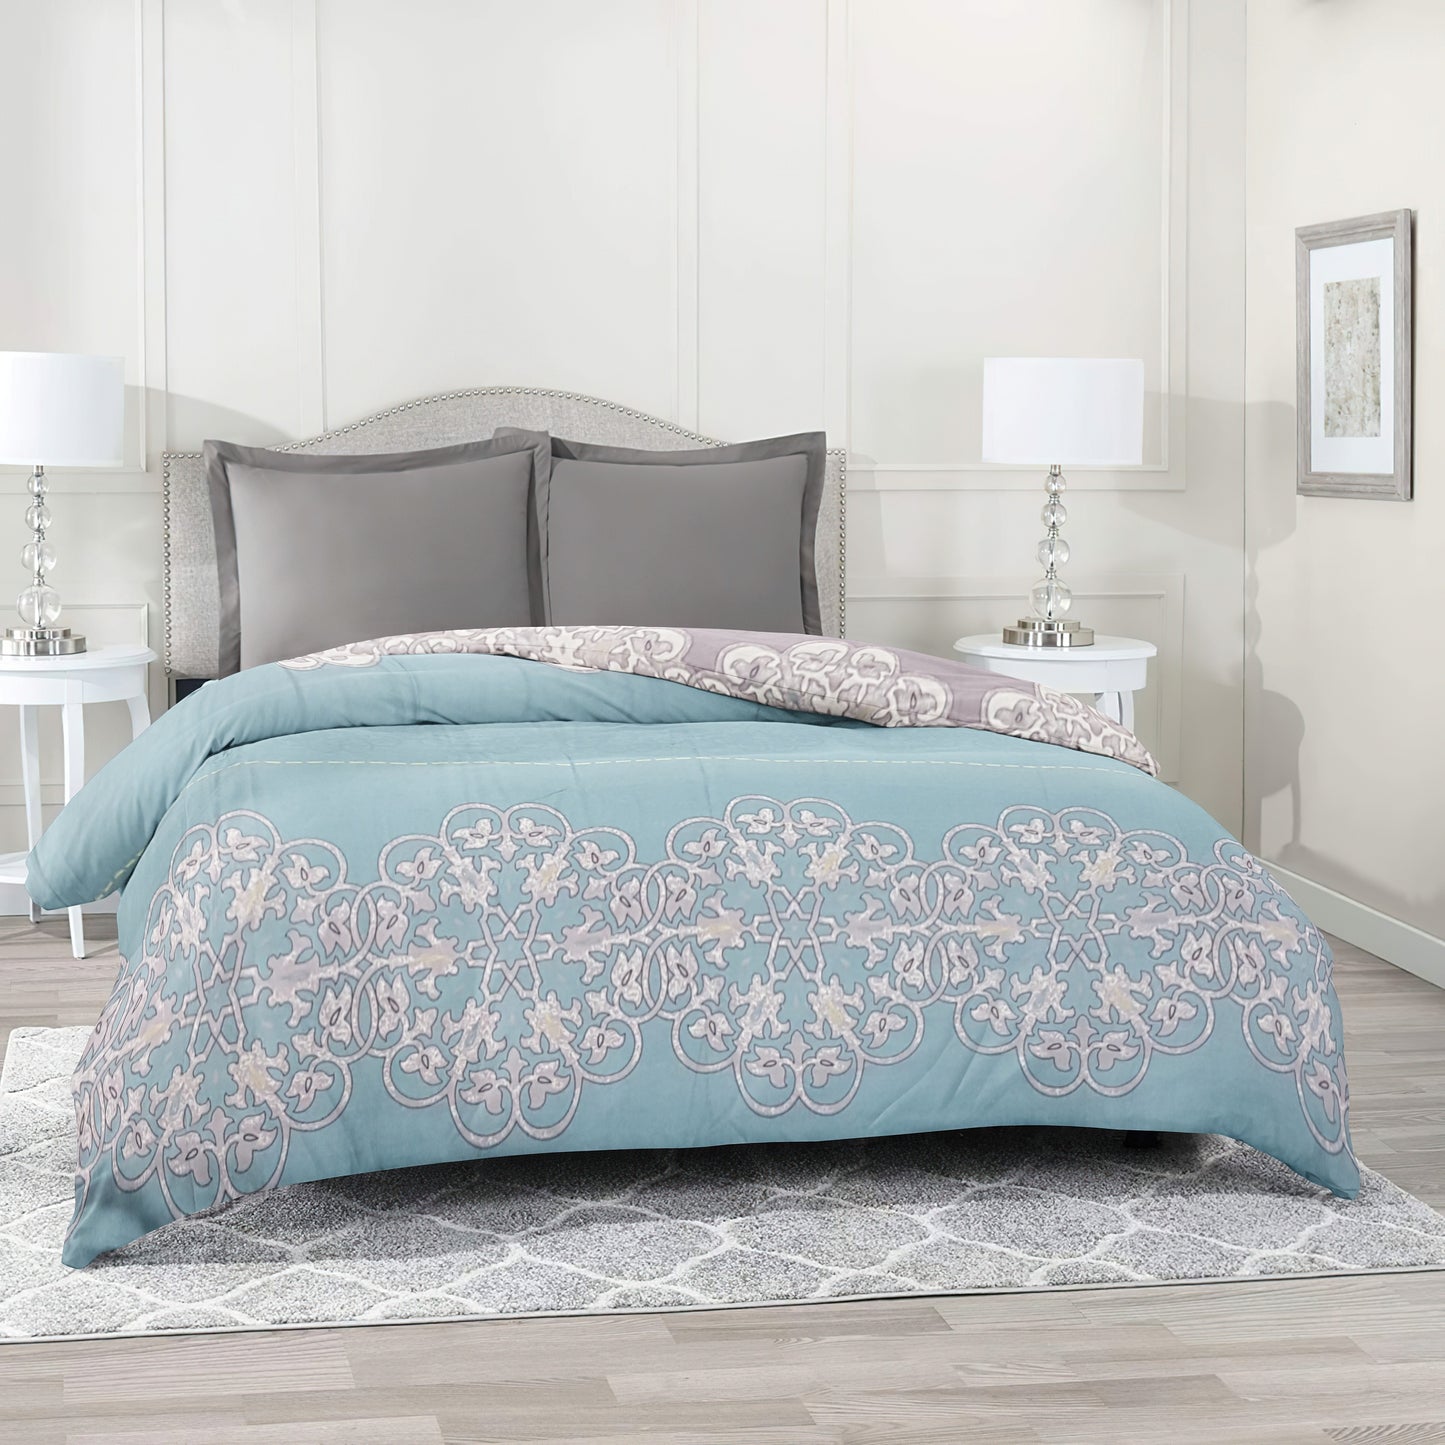 Duvet/Quilt Covers Soft Plush Pure Cotton Printed Royal Floral on Sea Green and Grey